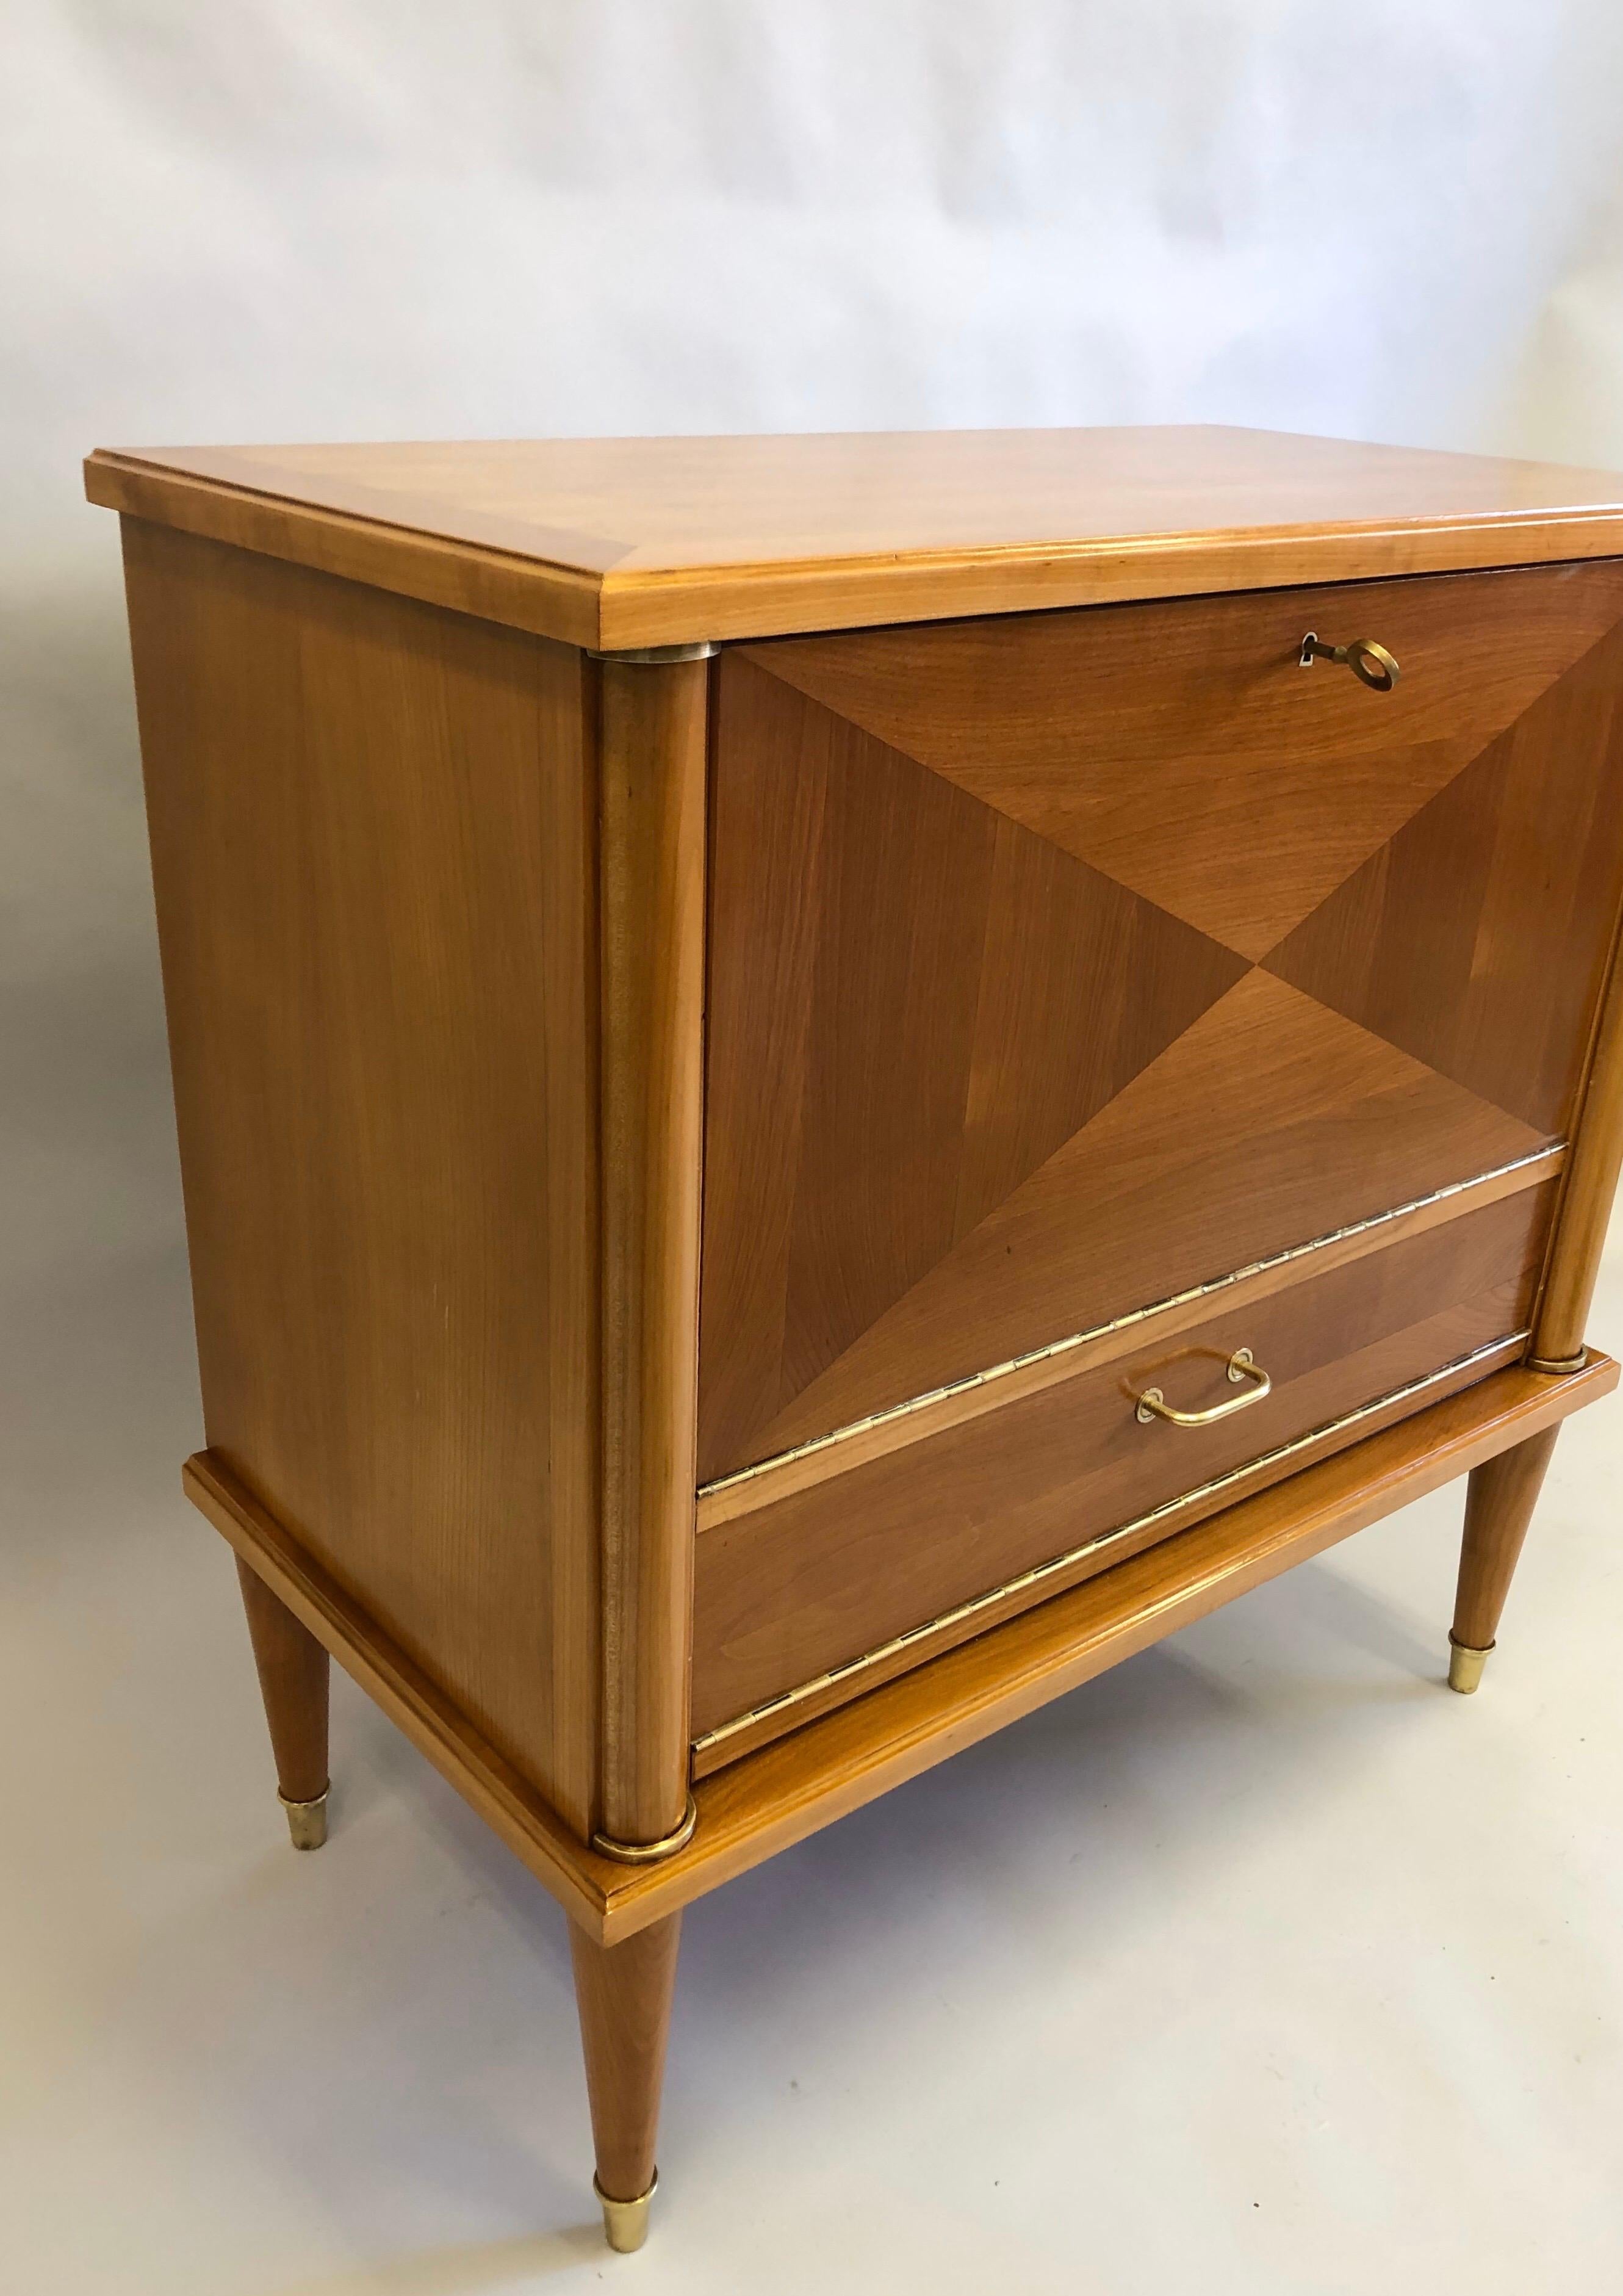 20th Century French Modern Neoclassical Cherry Inlay Sideboard/ Console/ Bar by Andre Arbus